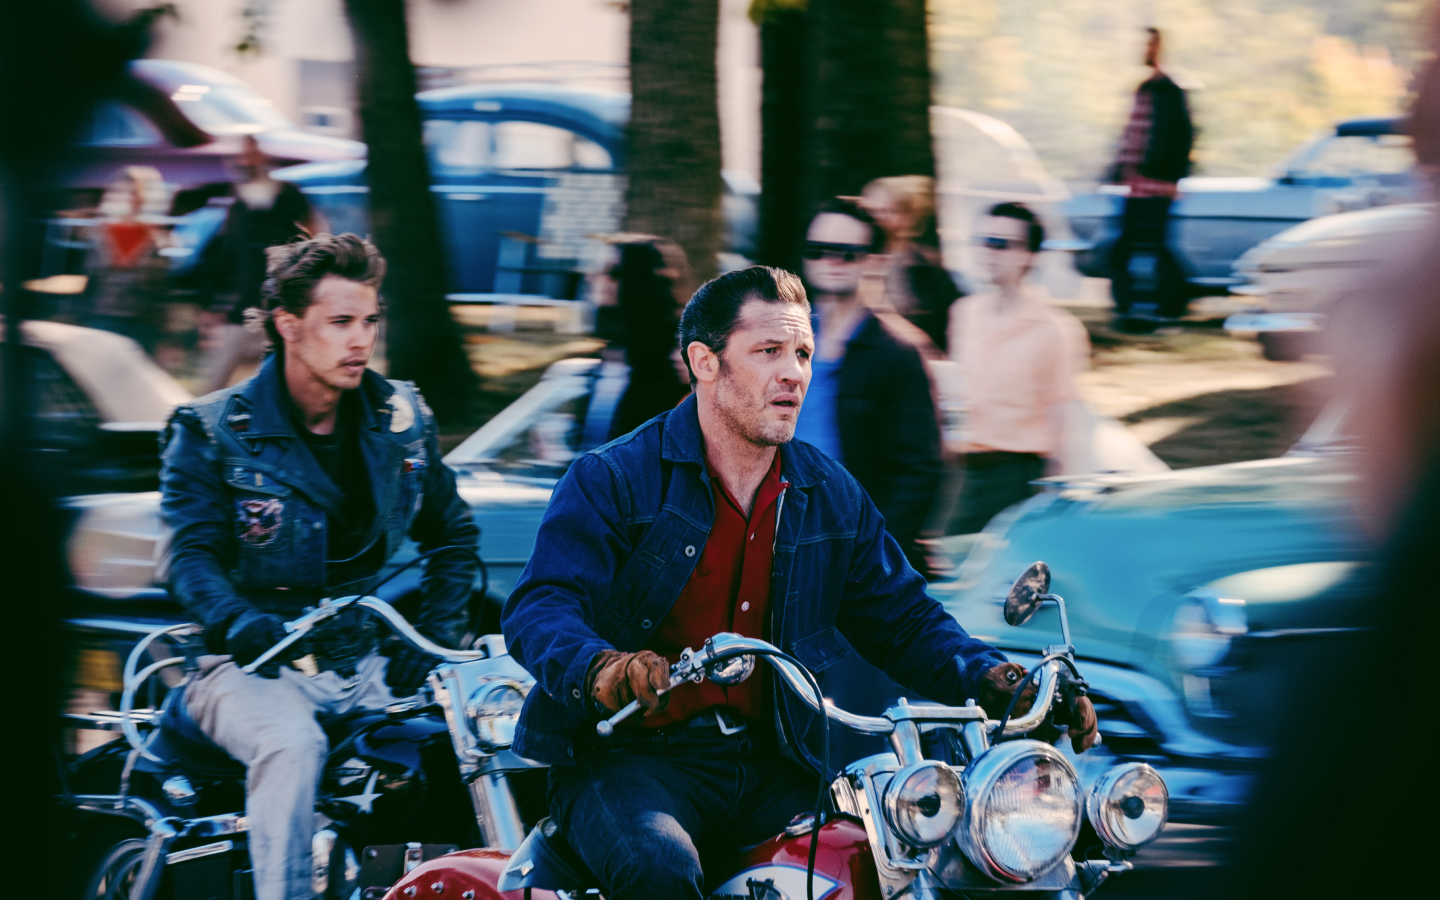 Tom Hardy as Johnny and Austin Butler as Benny ride their motorcycles